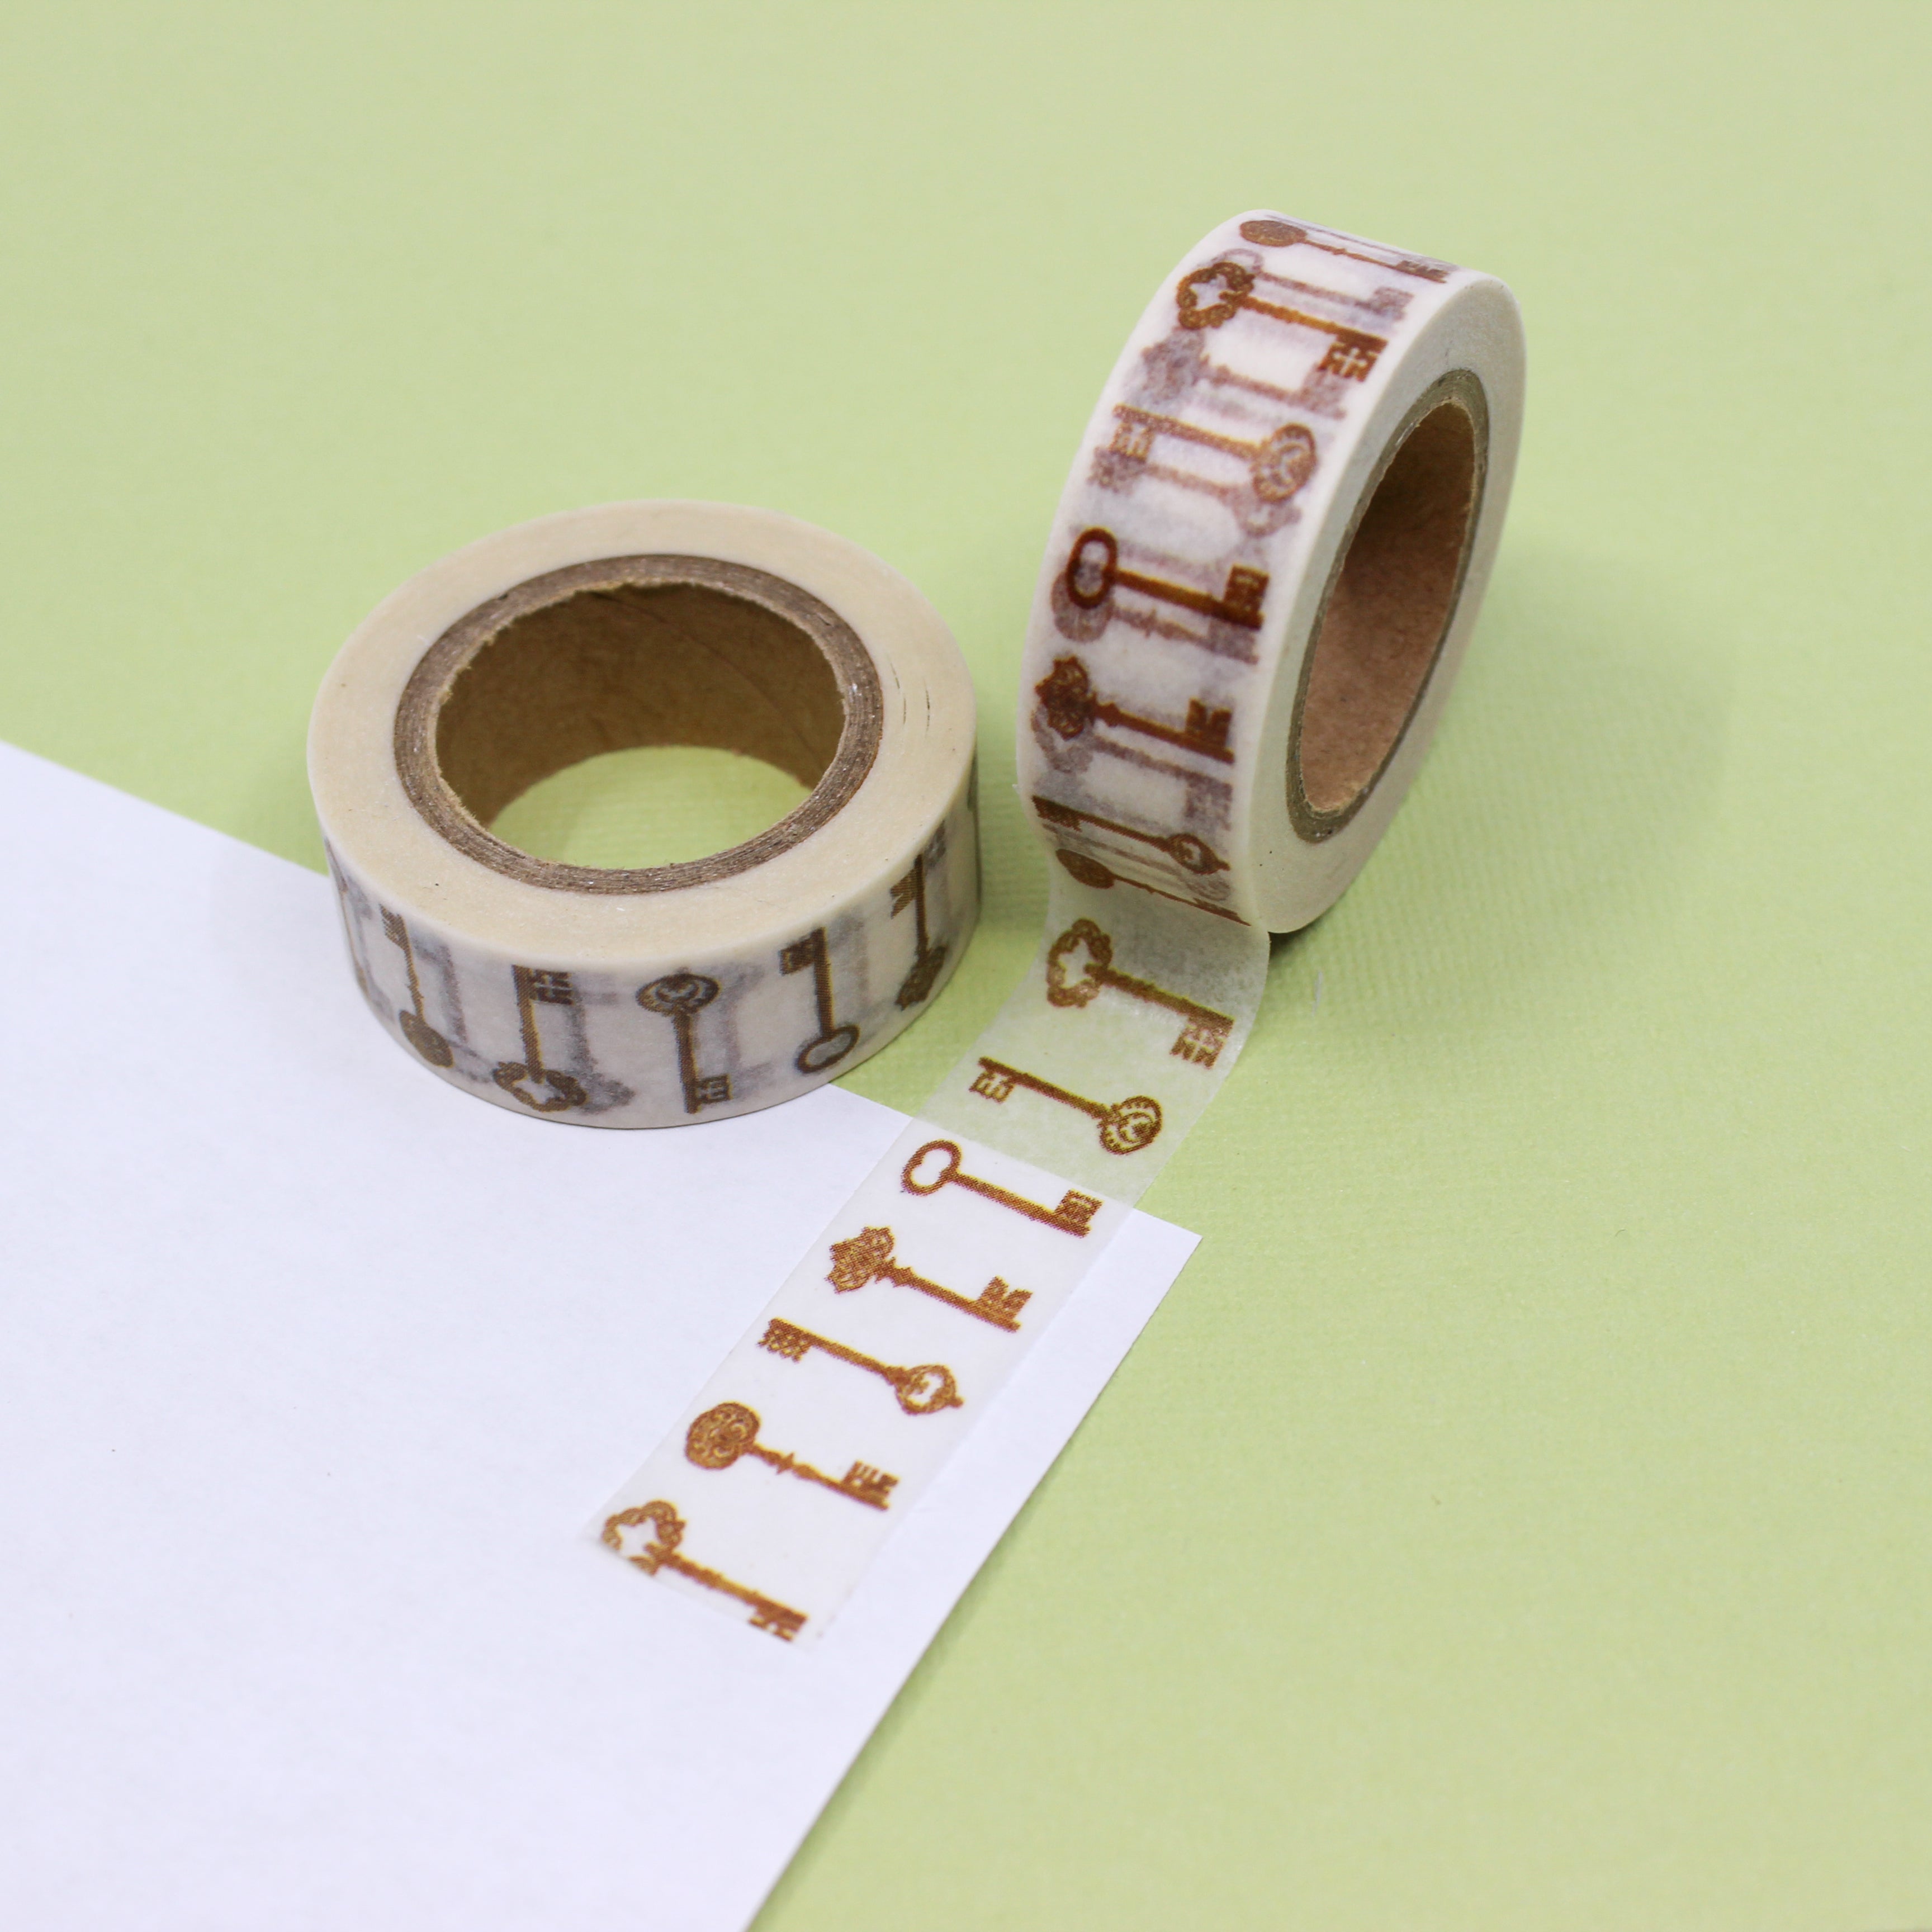 This is golden keys view themed washi tape from BBB Supplies Craft Shop